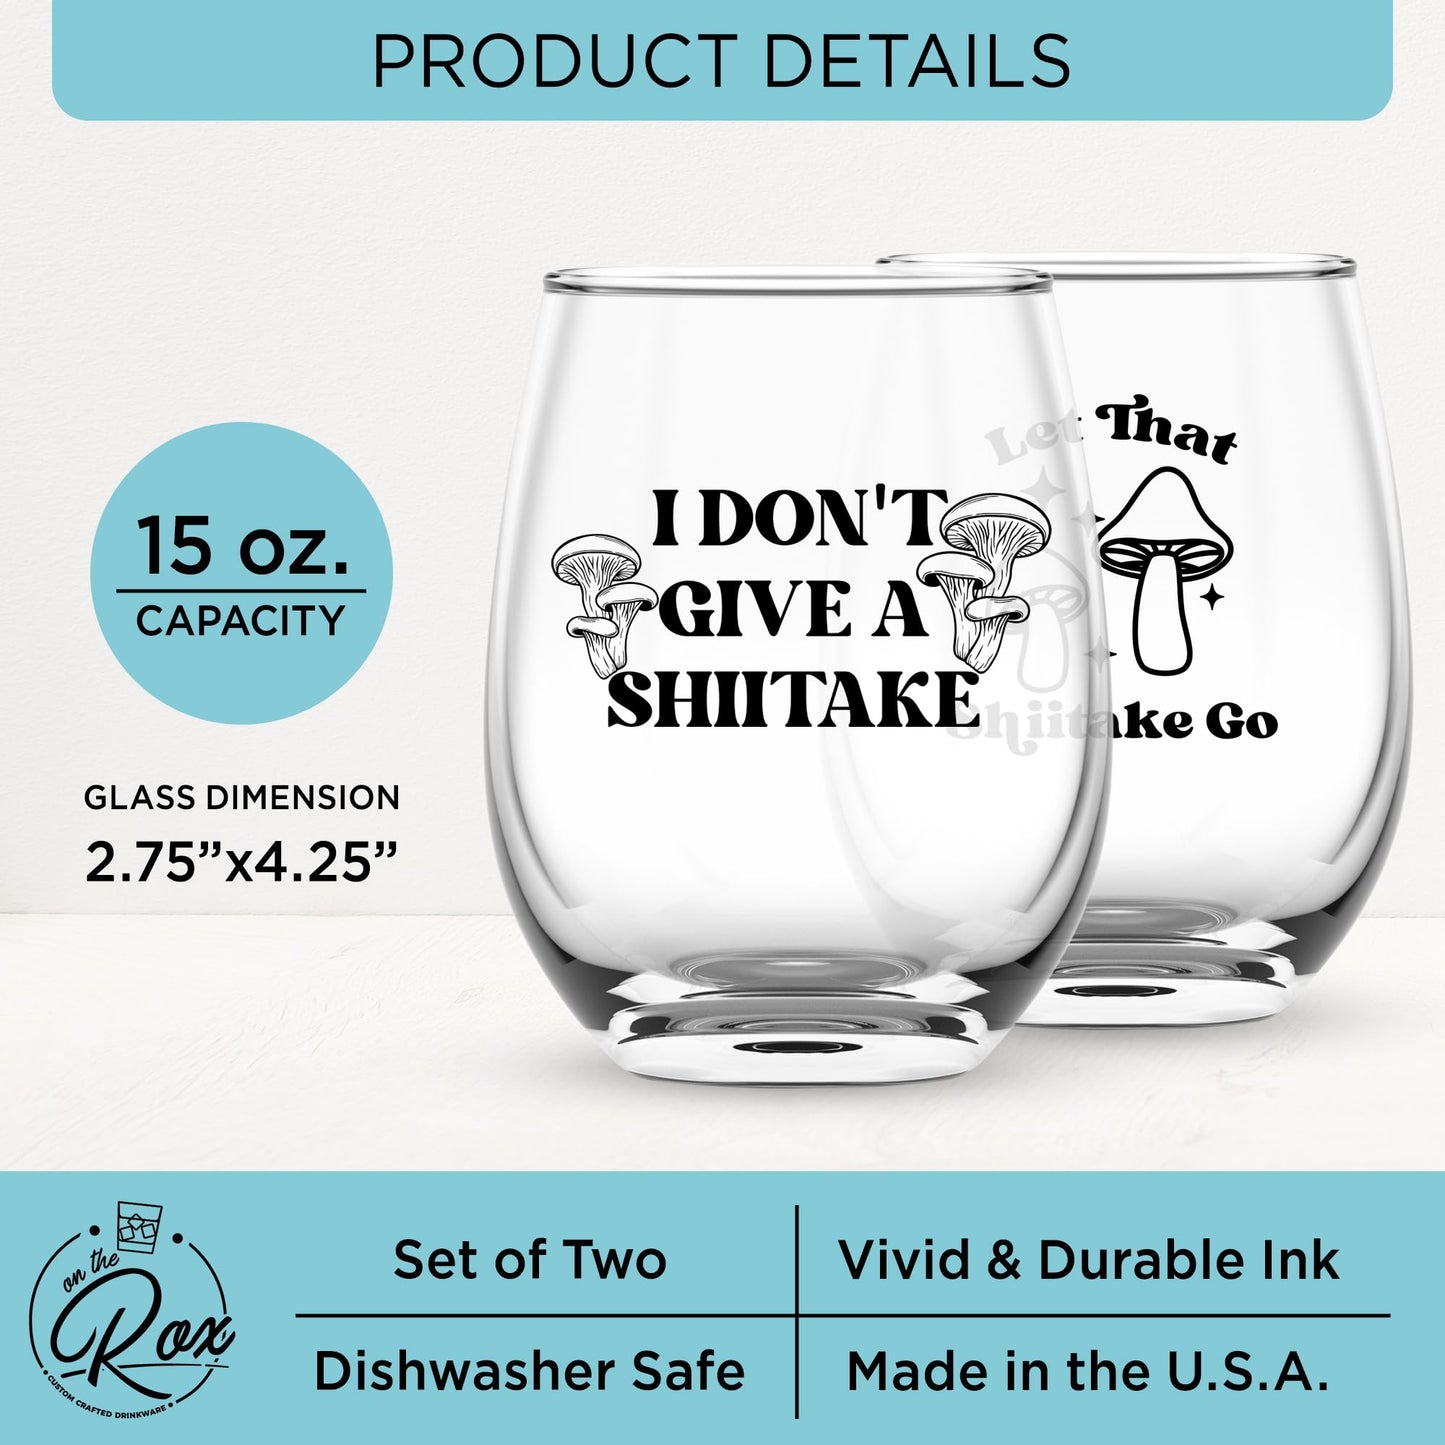 Mushroom Glass Gifts For Her and Him - 2PC Funny Wine Glass - 15oz Printed "I Don't Give A Shiitake", "Let That Shiitake Go"